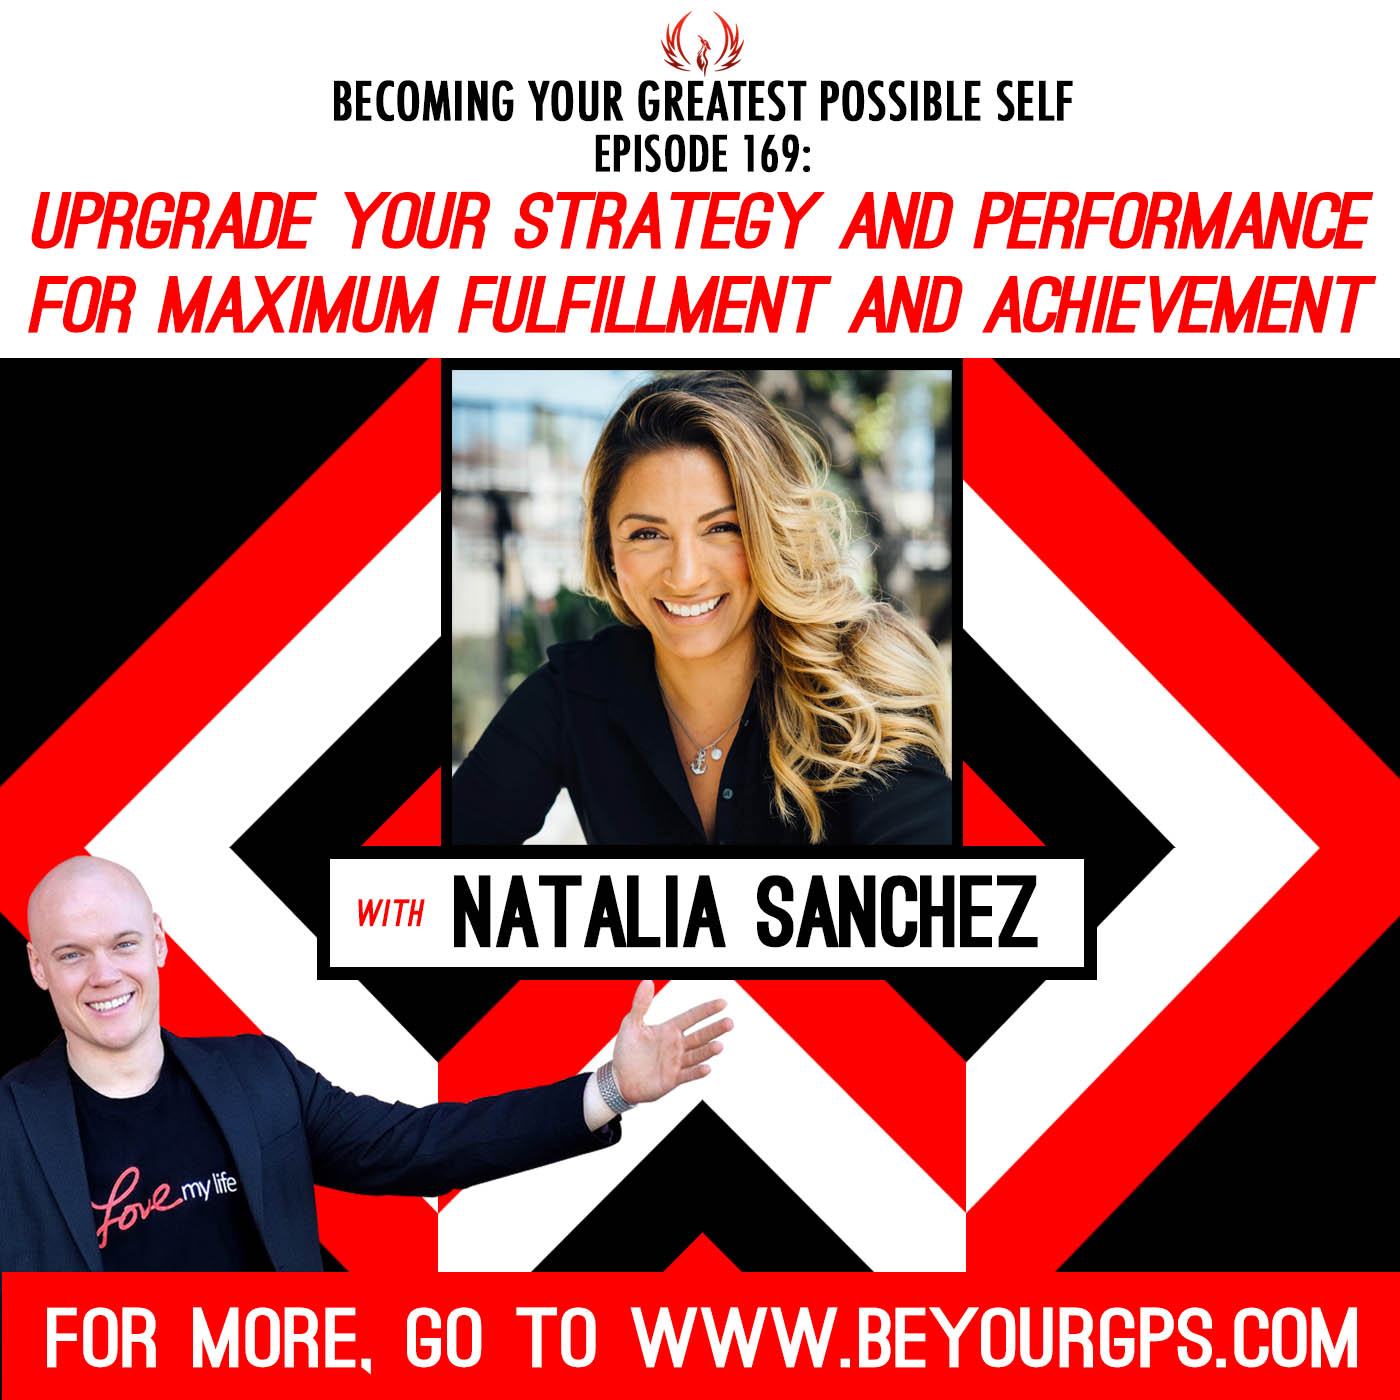 Upgrade Your Strategy and Performance for Maximum Fulfillment and Achievement with Natalia Sanchez